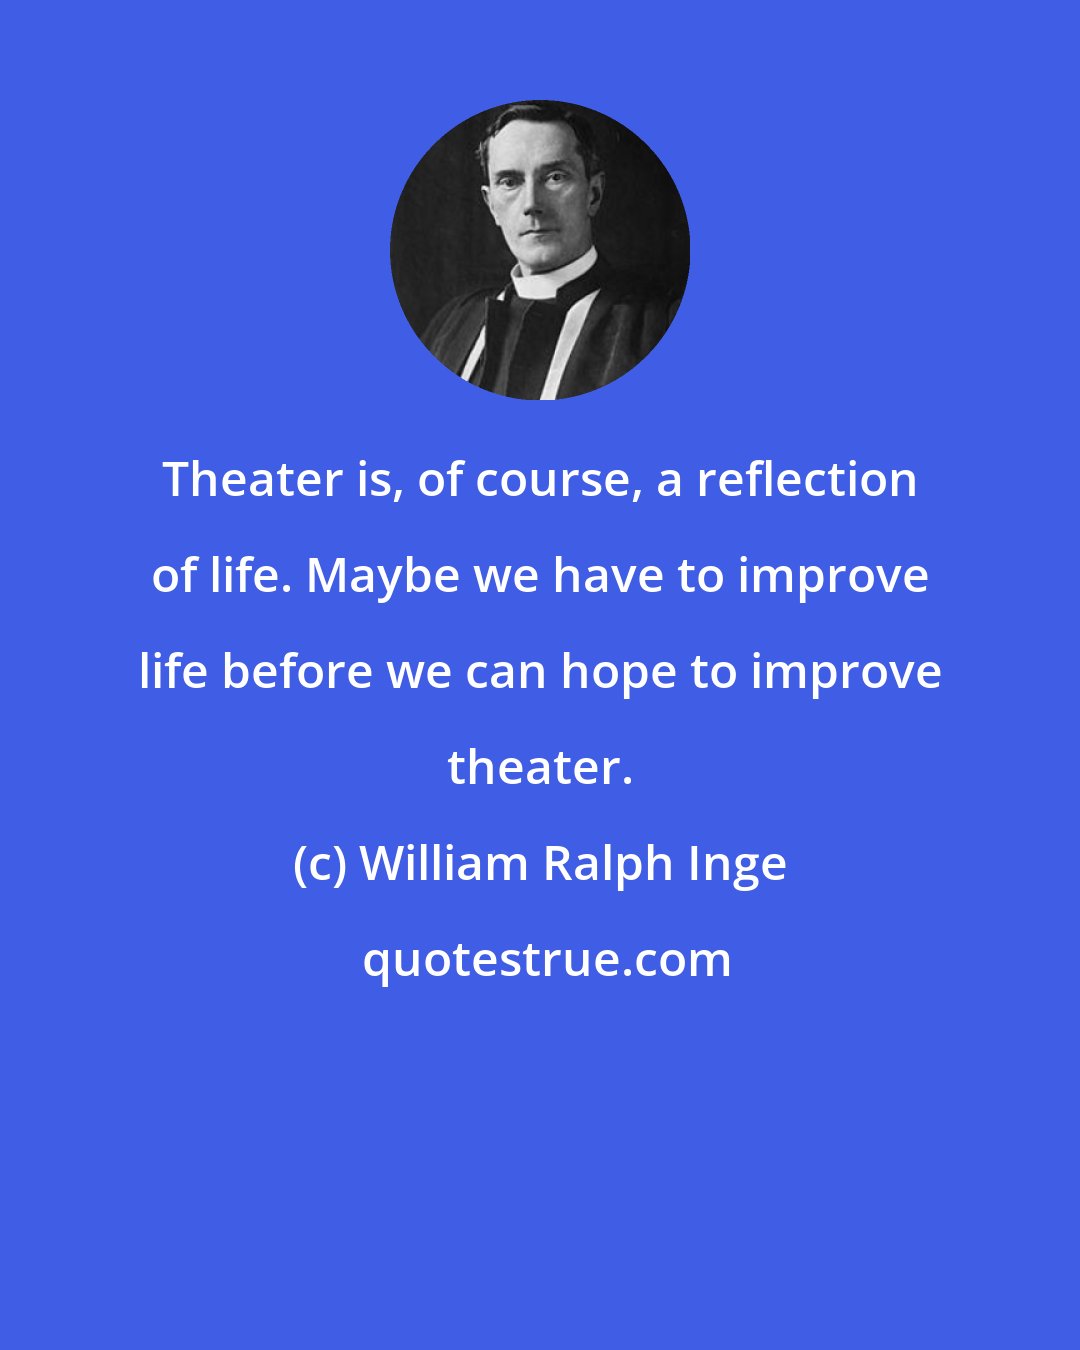 William Ralph Inge: Theater is, of course, a reflection of life. Maybe we have to improve life before we can hope to improve theater.